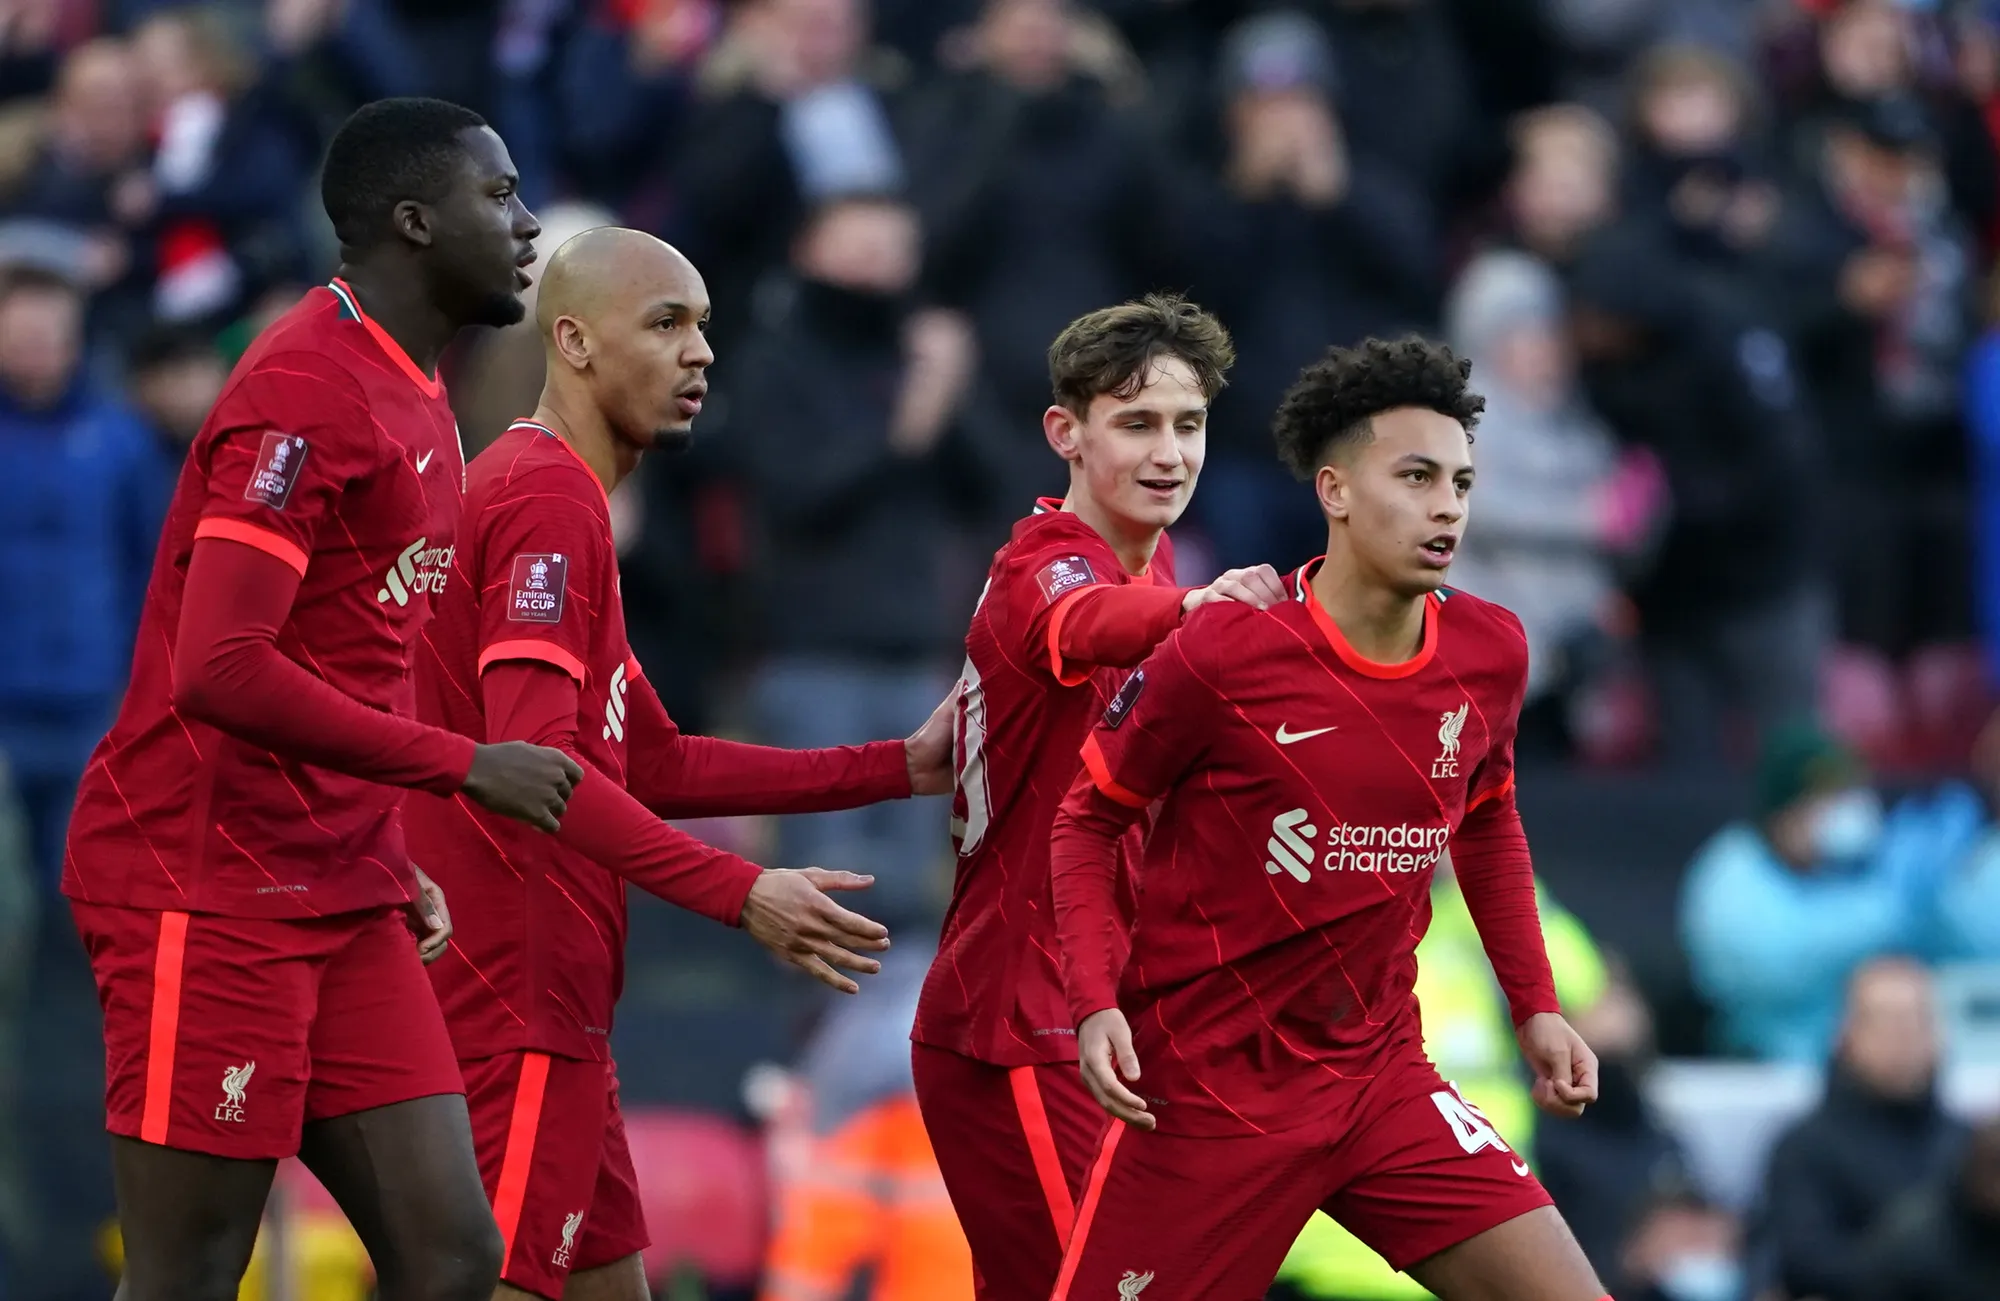 Kaide Gordon became Liverpools youngest ever FA Cup goalscorer